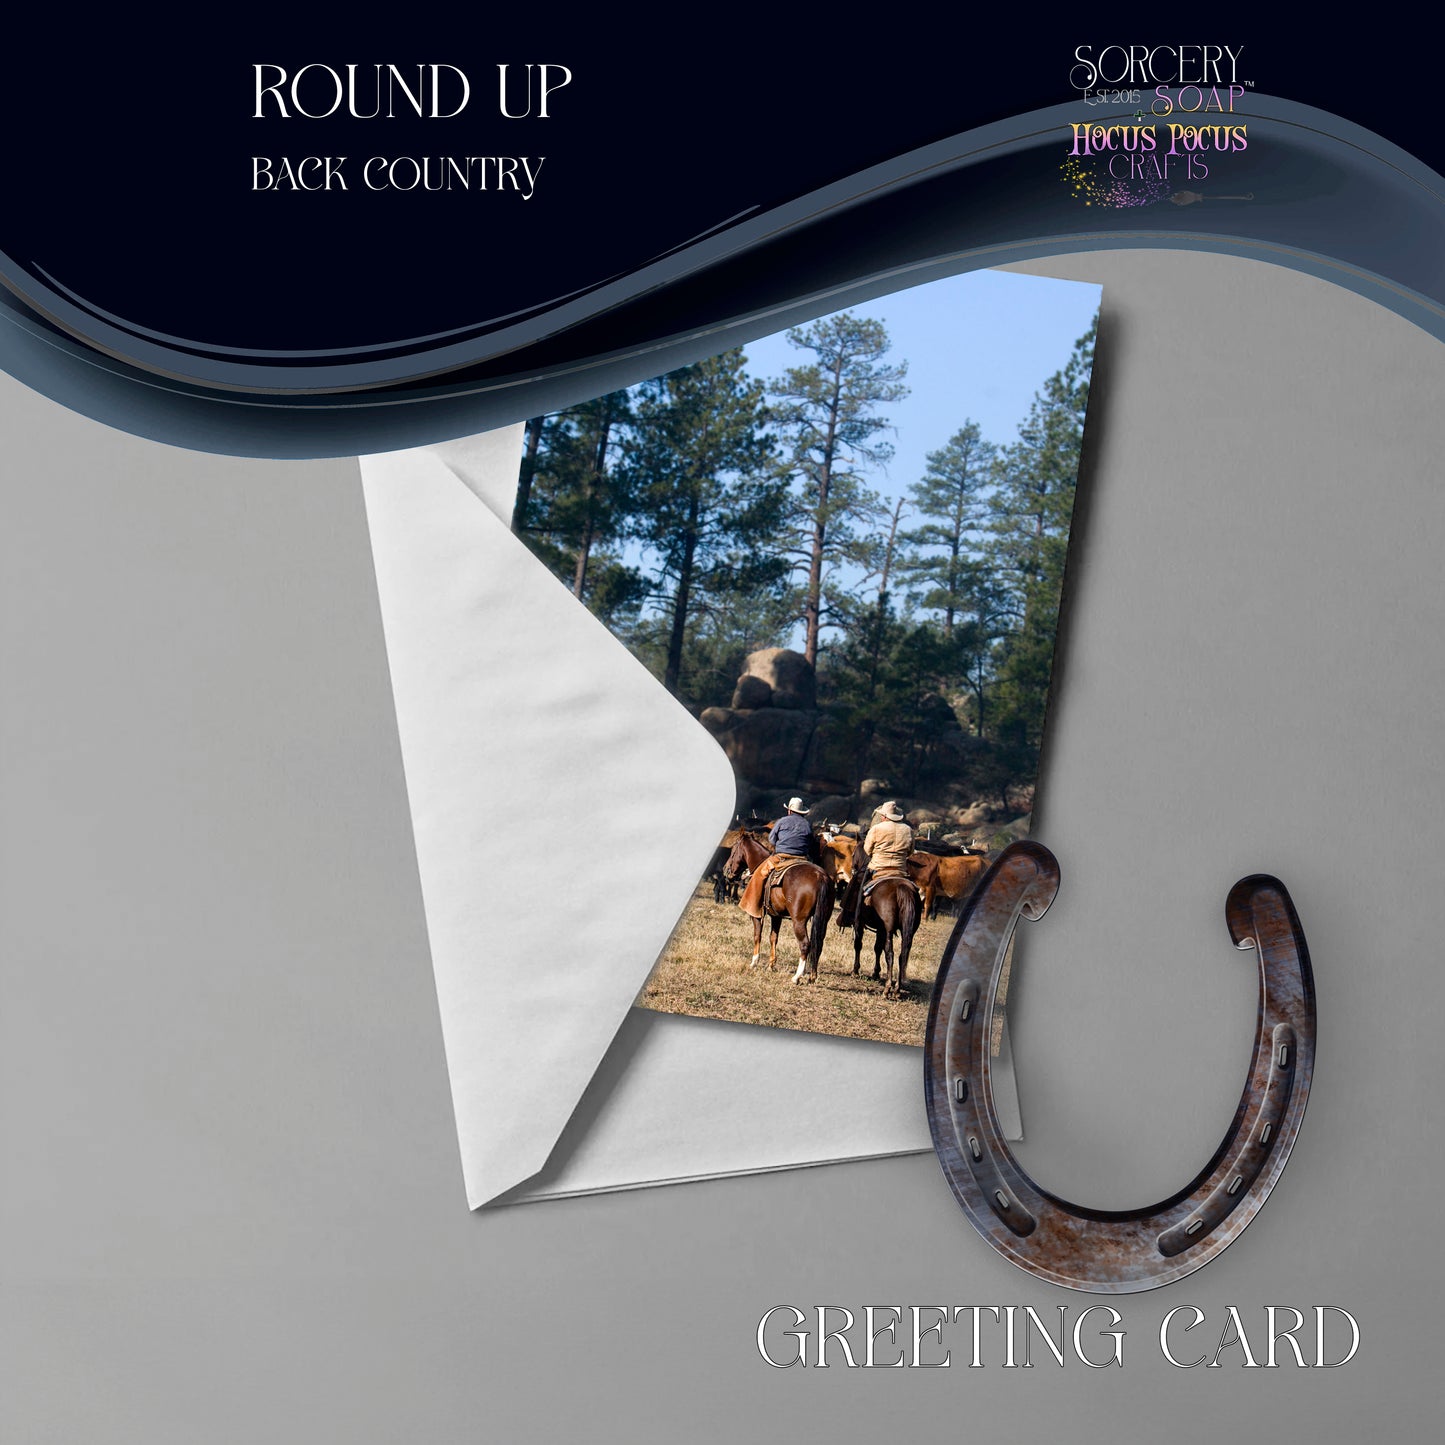 Back Country Greeting Cards - Round Up